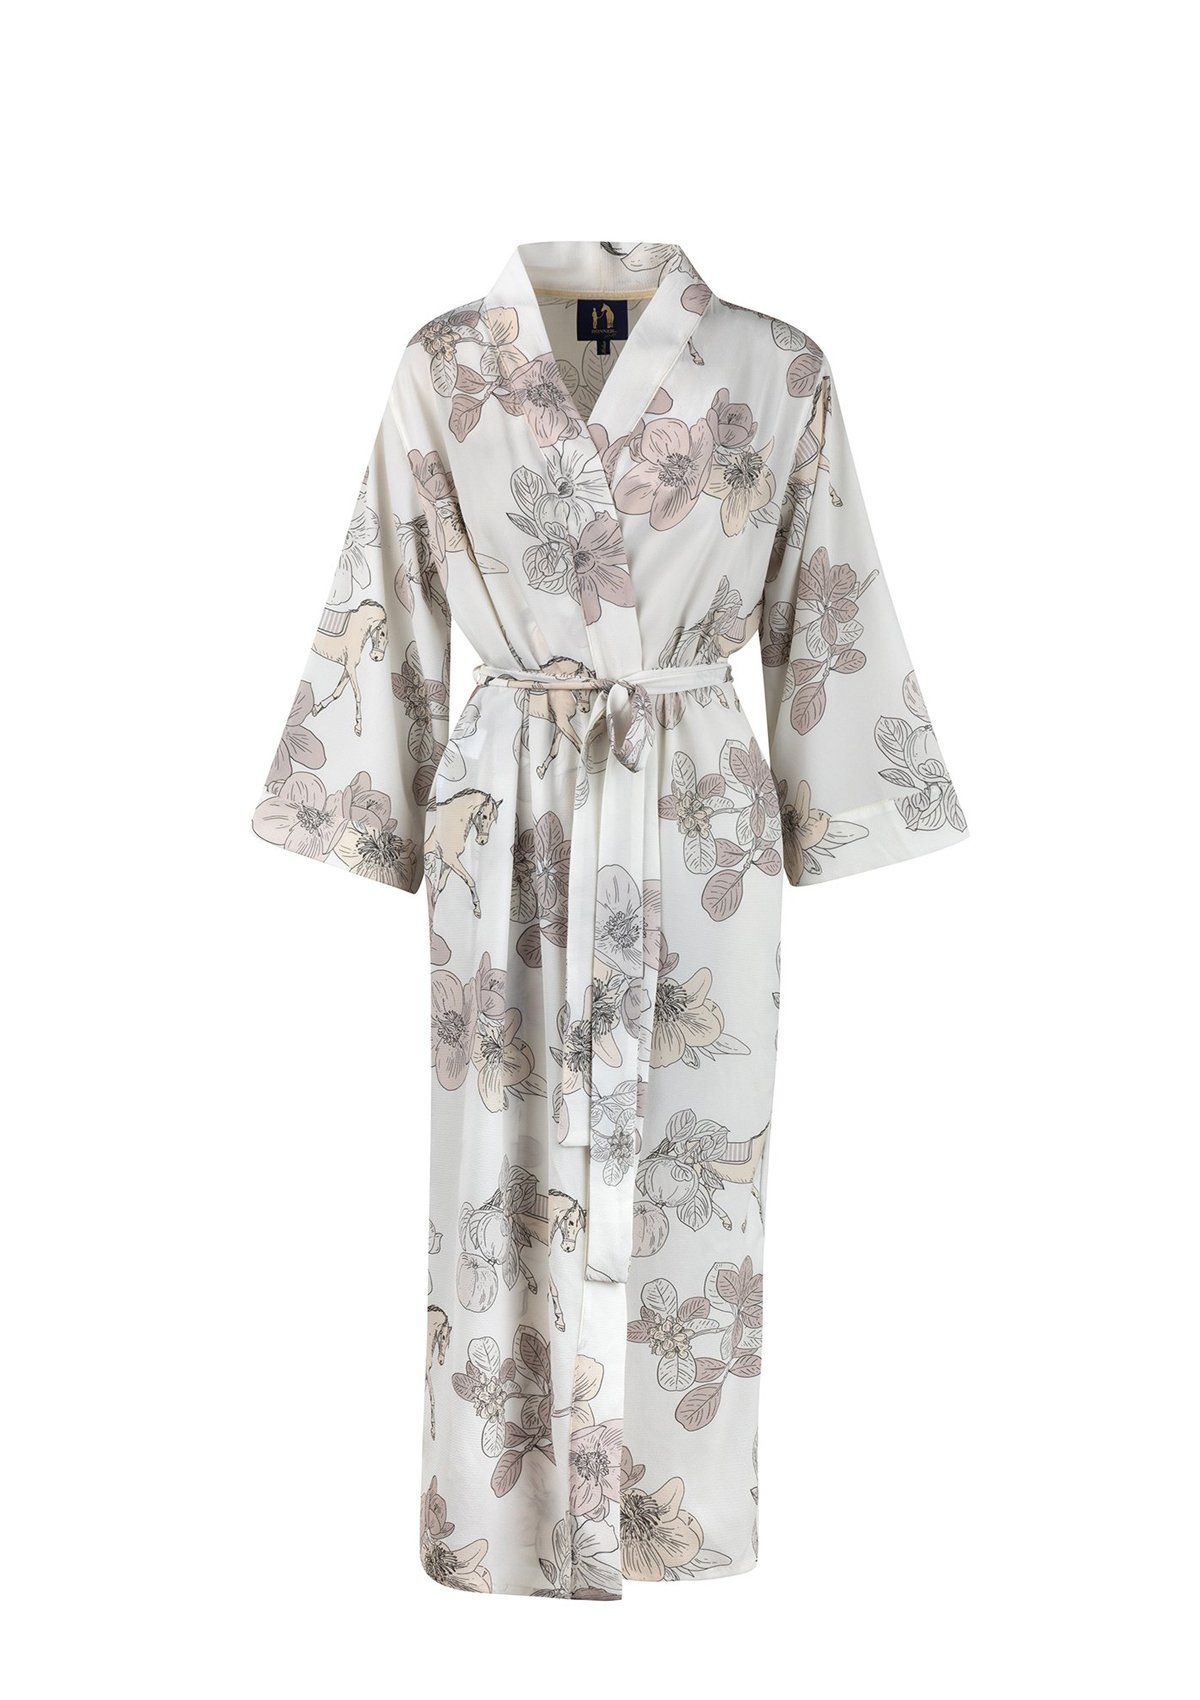 Timeless horse and floral print robe